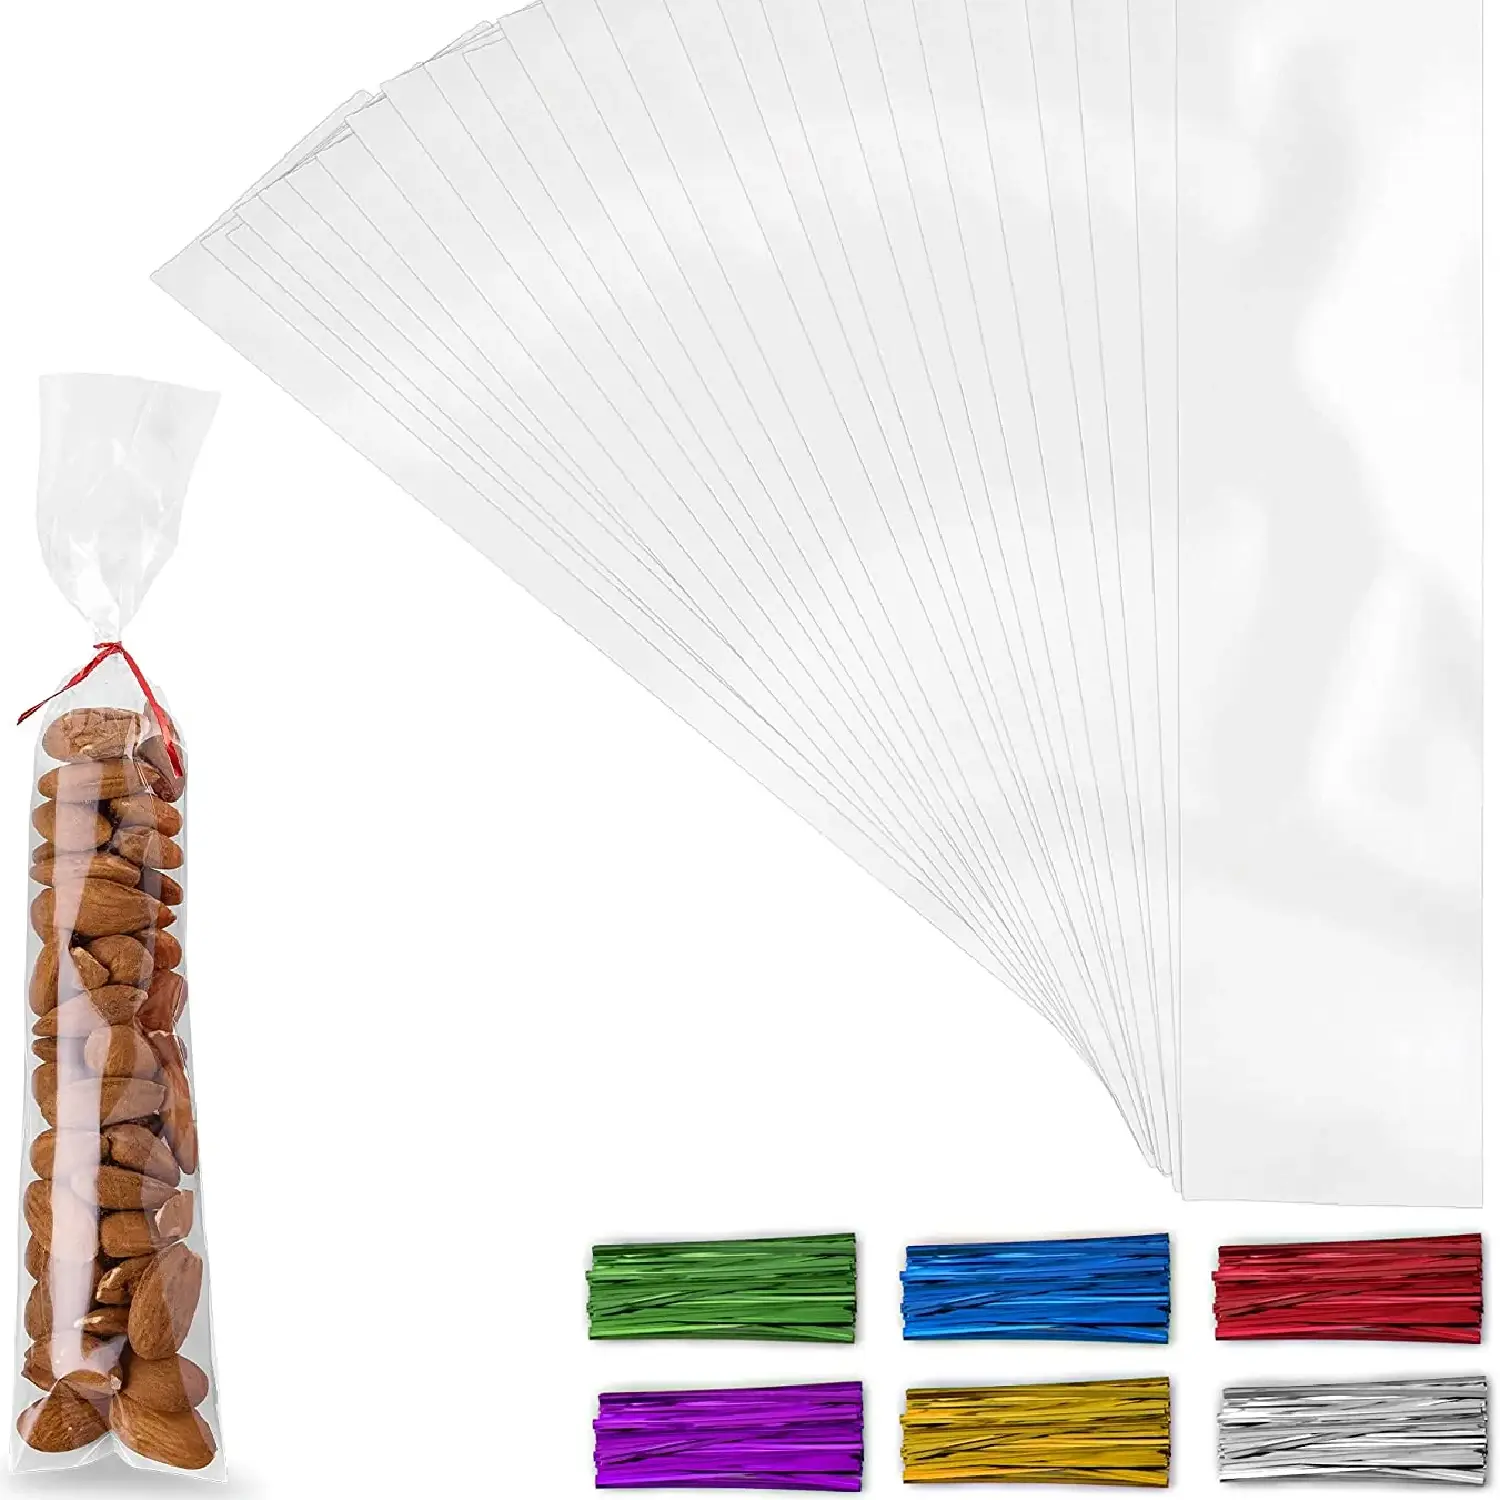 Simple Craft Candy Treat Cellophane Bags - 200 Pack